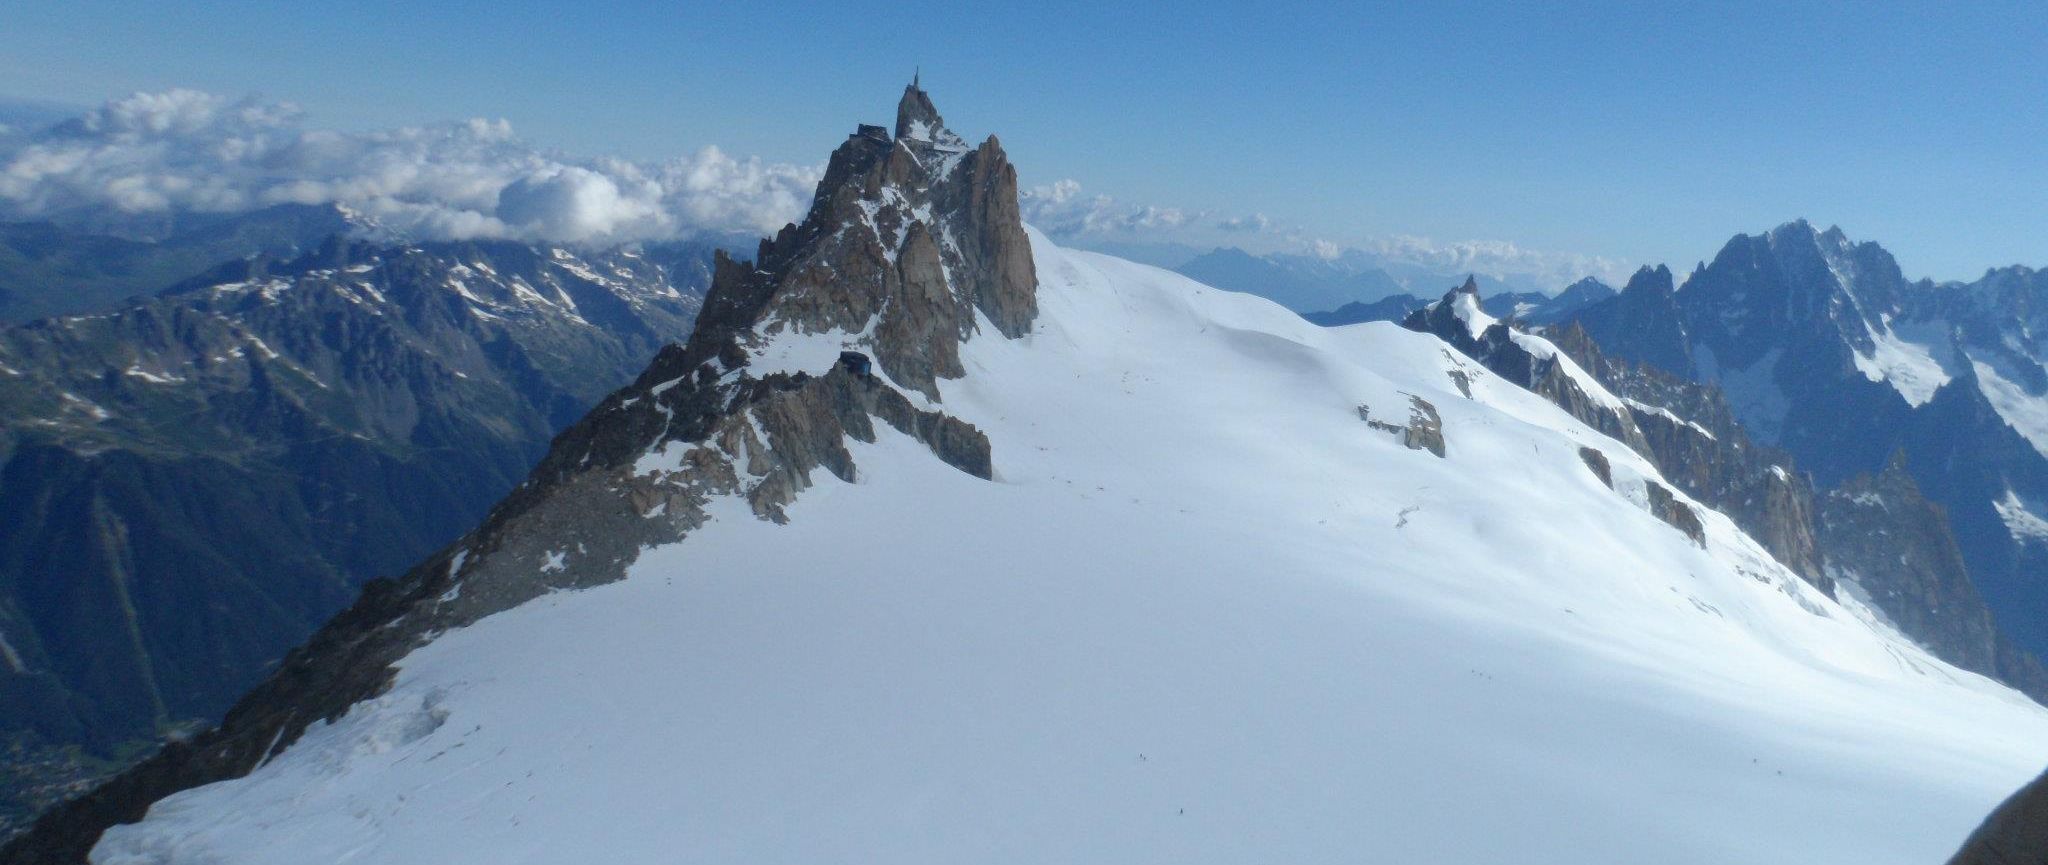 Aiguille du Midi in the French Alps at Chamonix